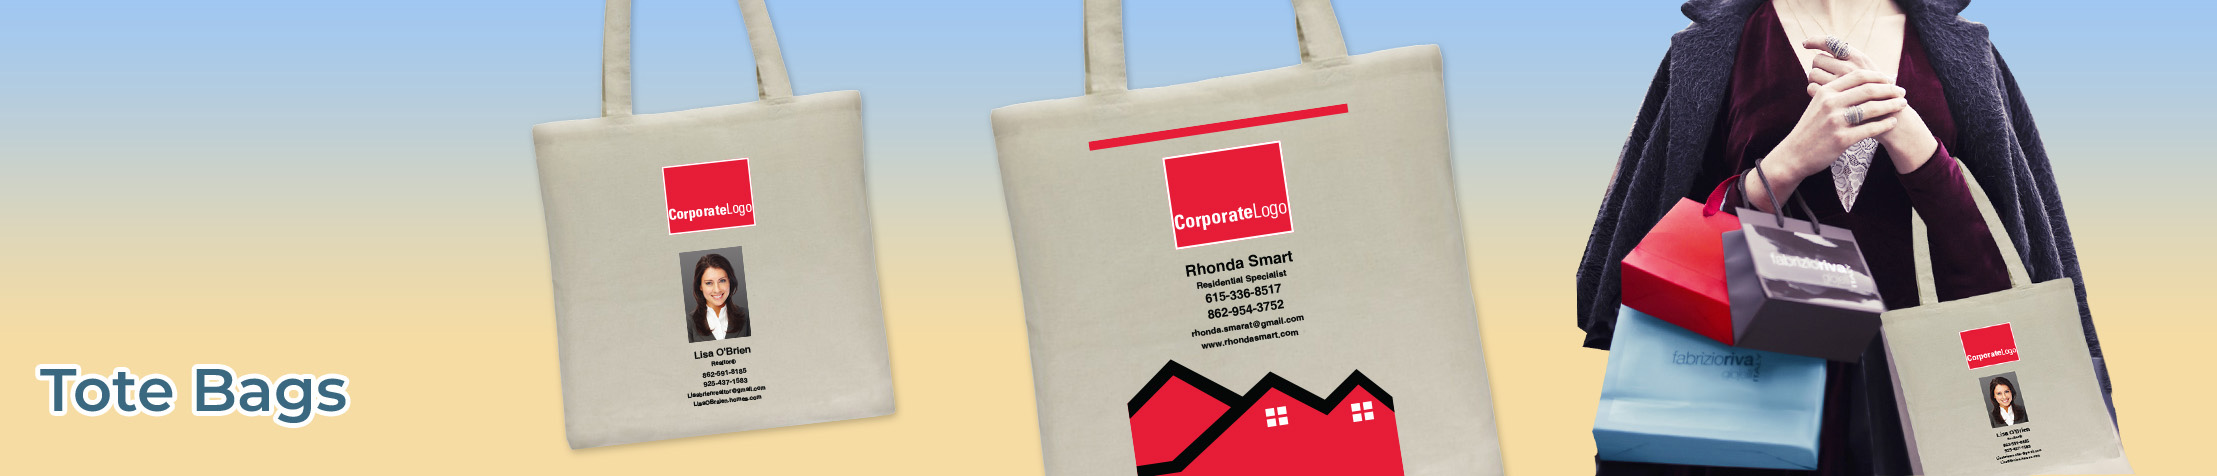 Real Living Real Estate Tote Bags - Real Living Real Estate  personalized realtor promotional products | BestPrintBuy.com